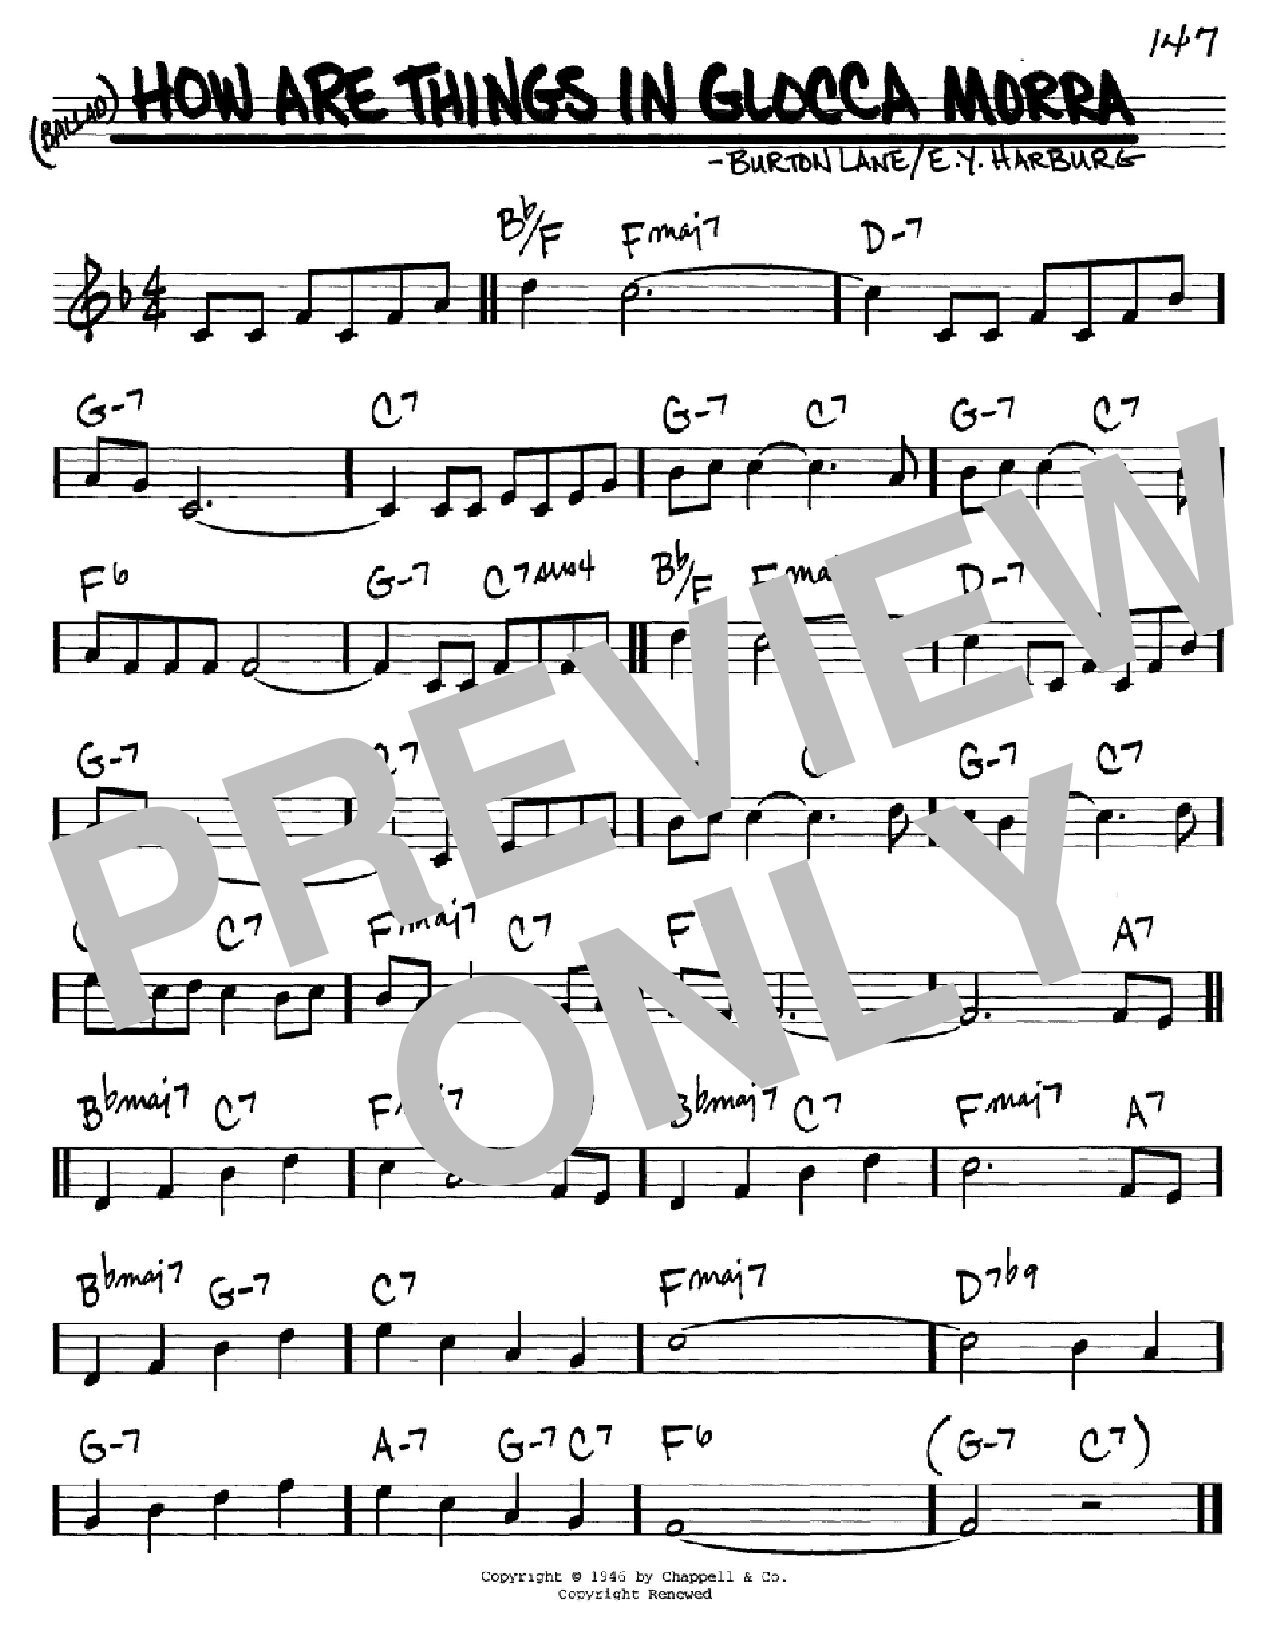 Download E.Y. Harburg How Are Things In Glocca Morra Sheet Music